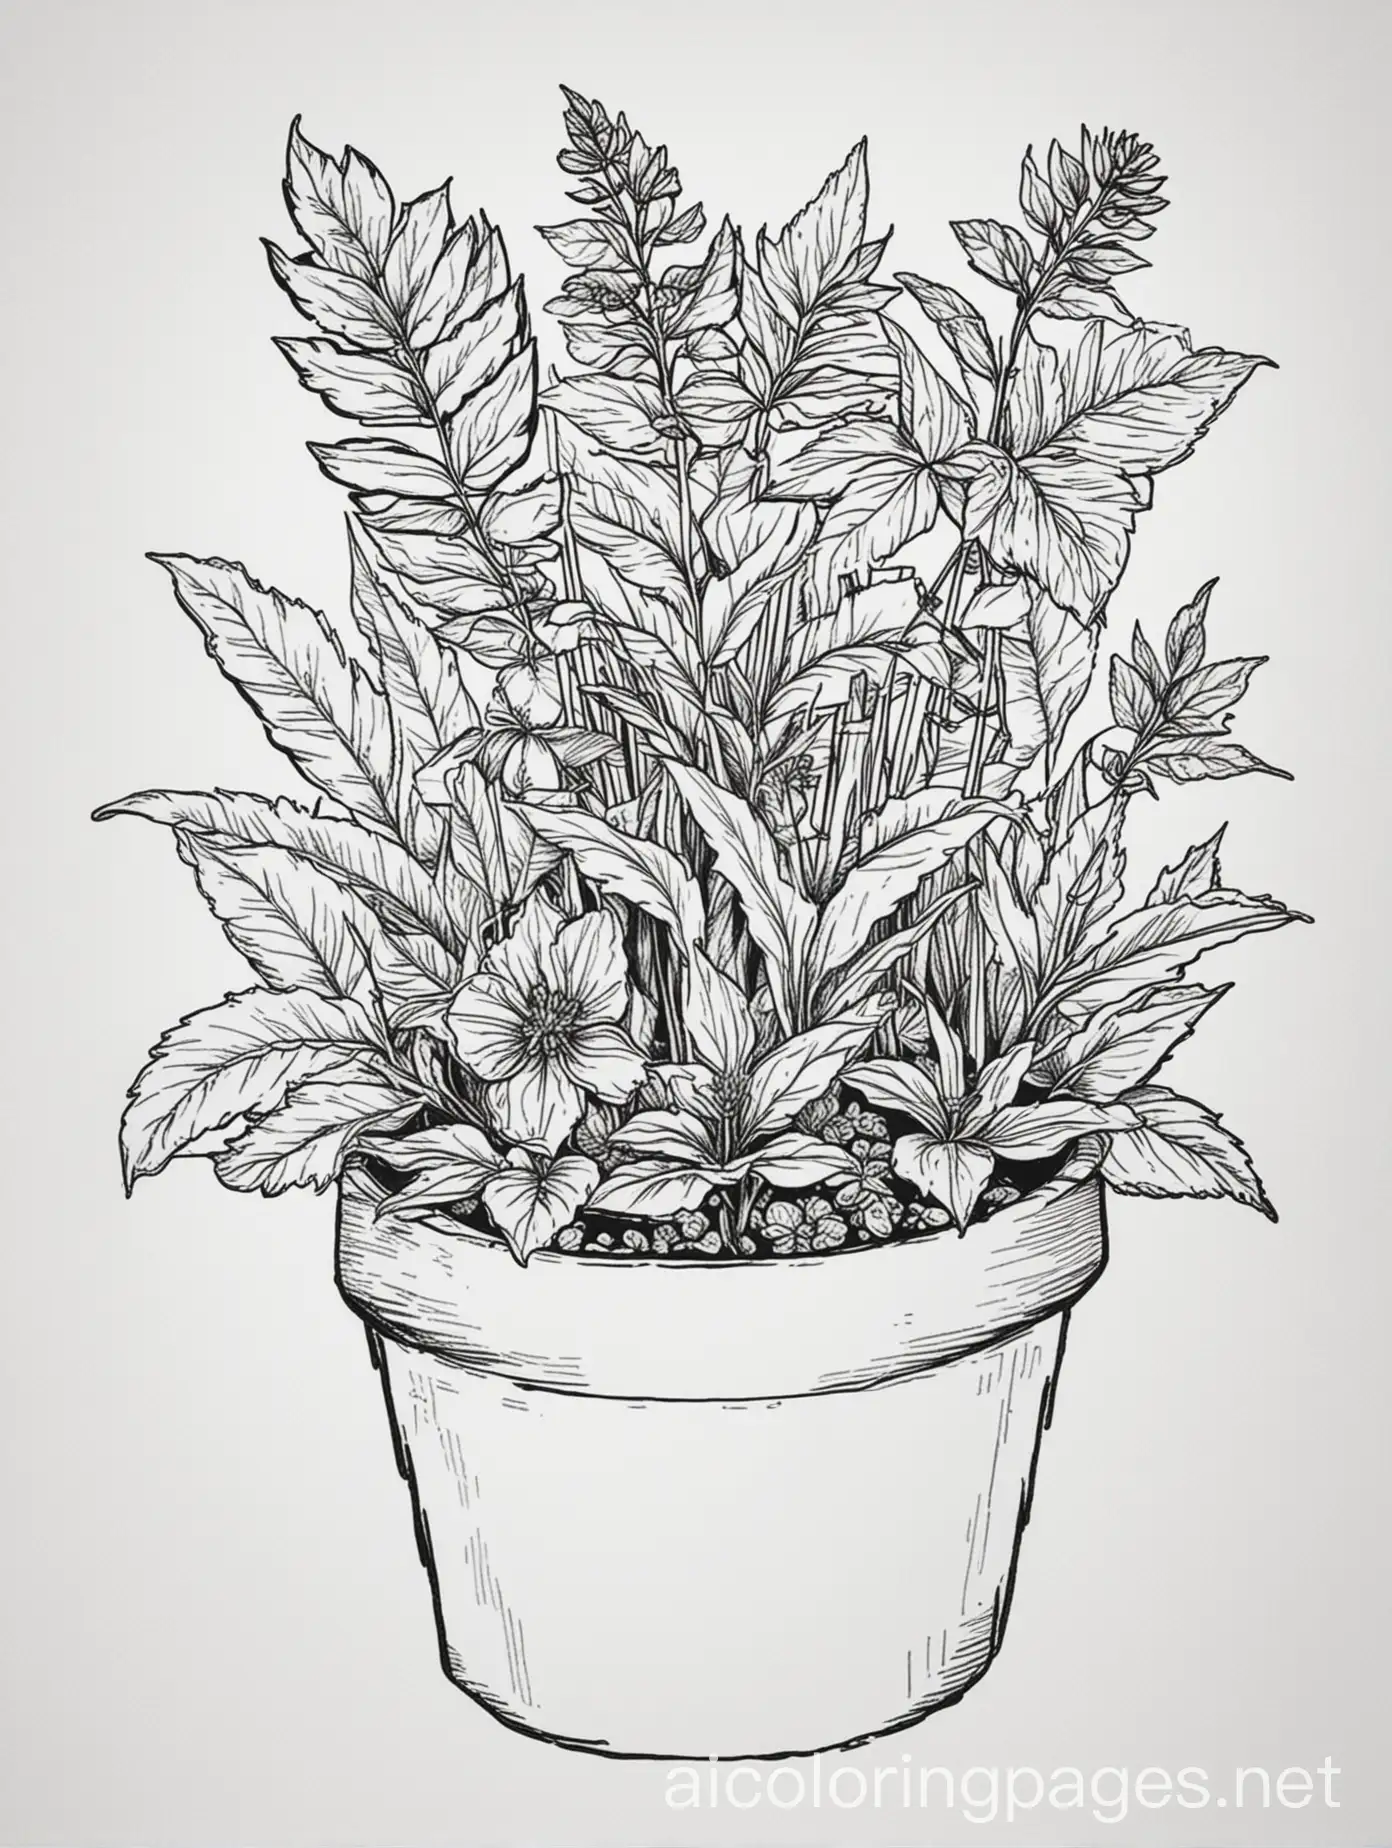 coloring book
herbs in pots 
garden tools laying in front, Coloring Page, black and white, line art, white background, Simplicity, Ample White Space. The background of the coloring page is plain white to make it easy for young children to color within the lines. The outlines of all the subjects are easy to distinguish, making it simple for kids to color without too much difficulty